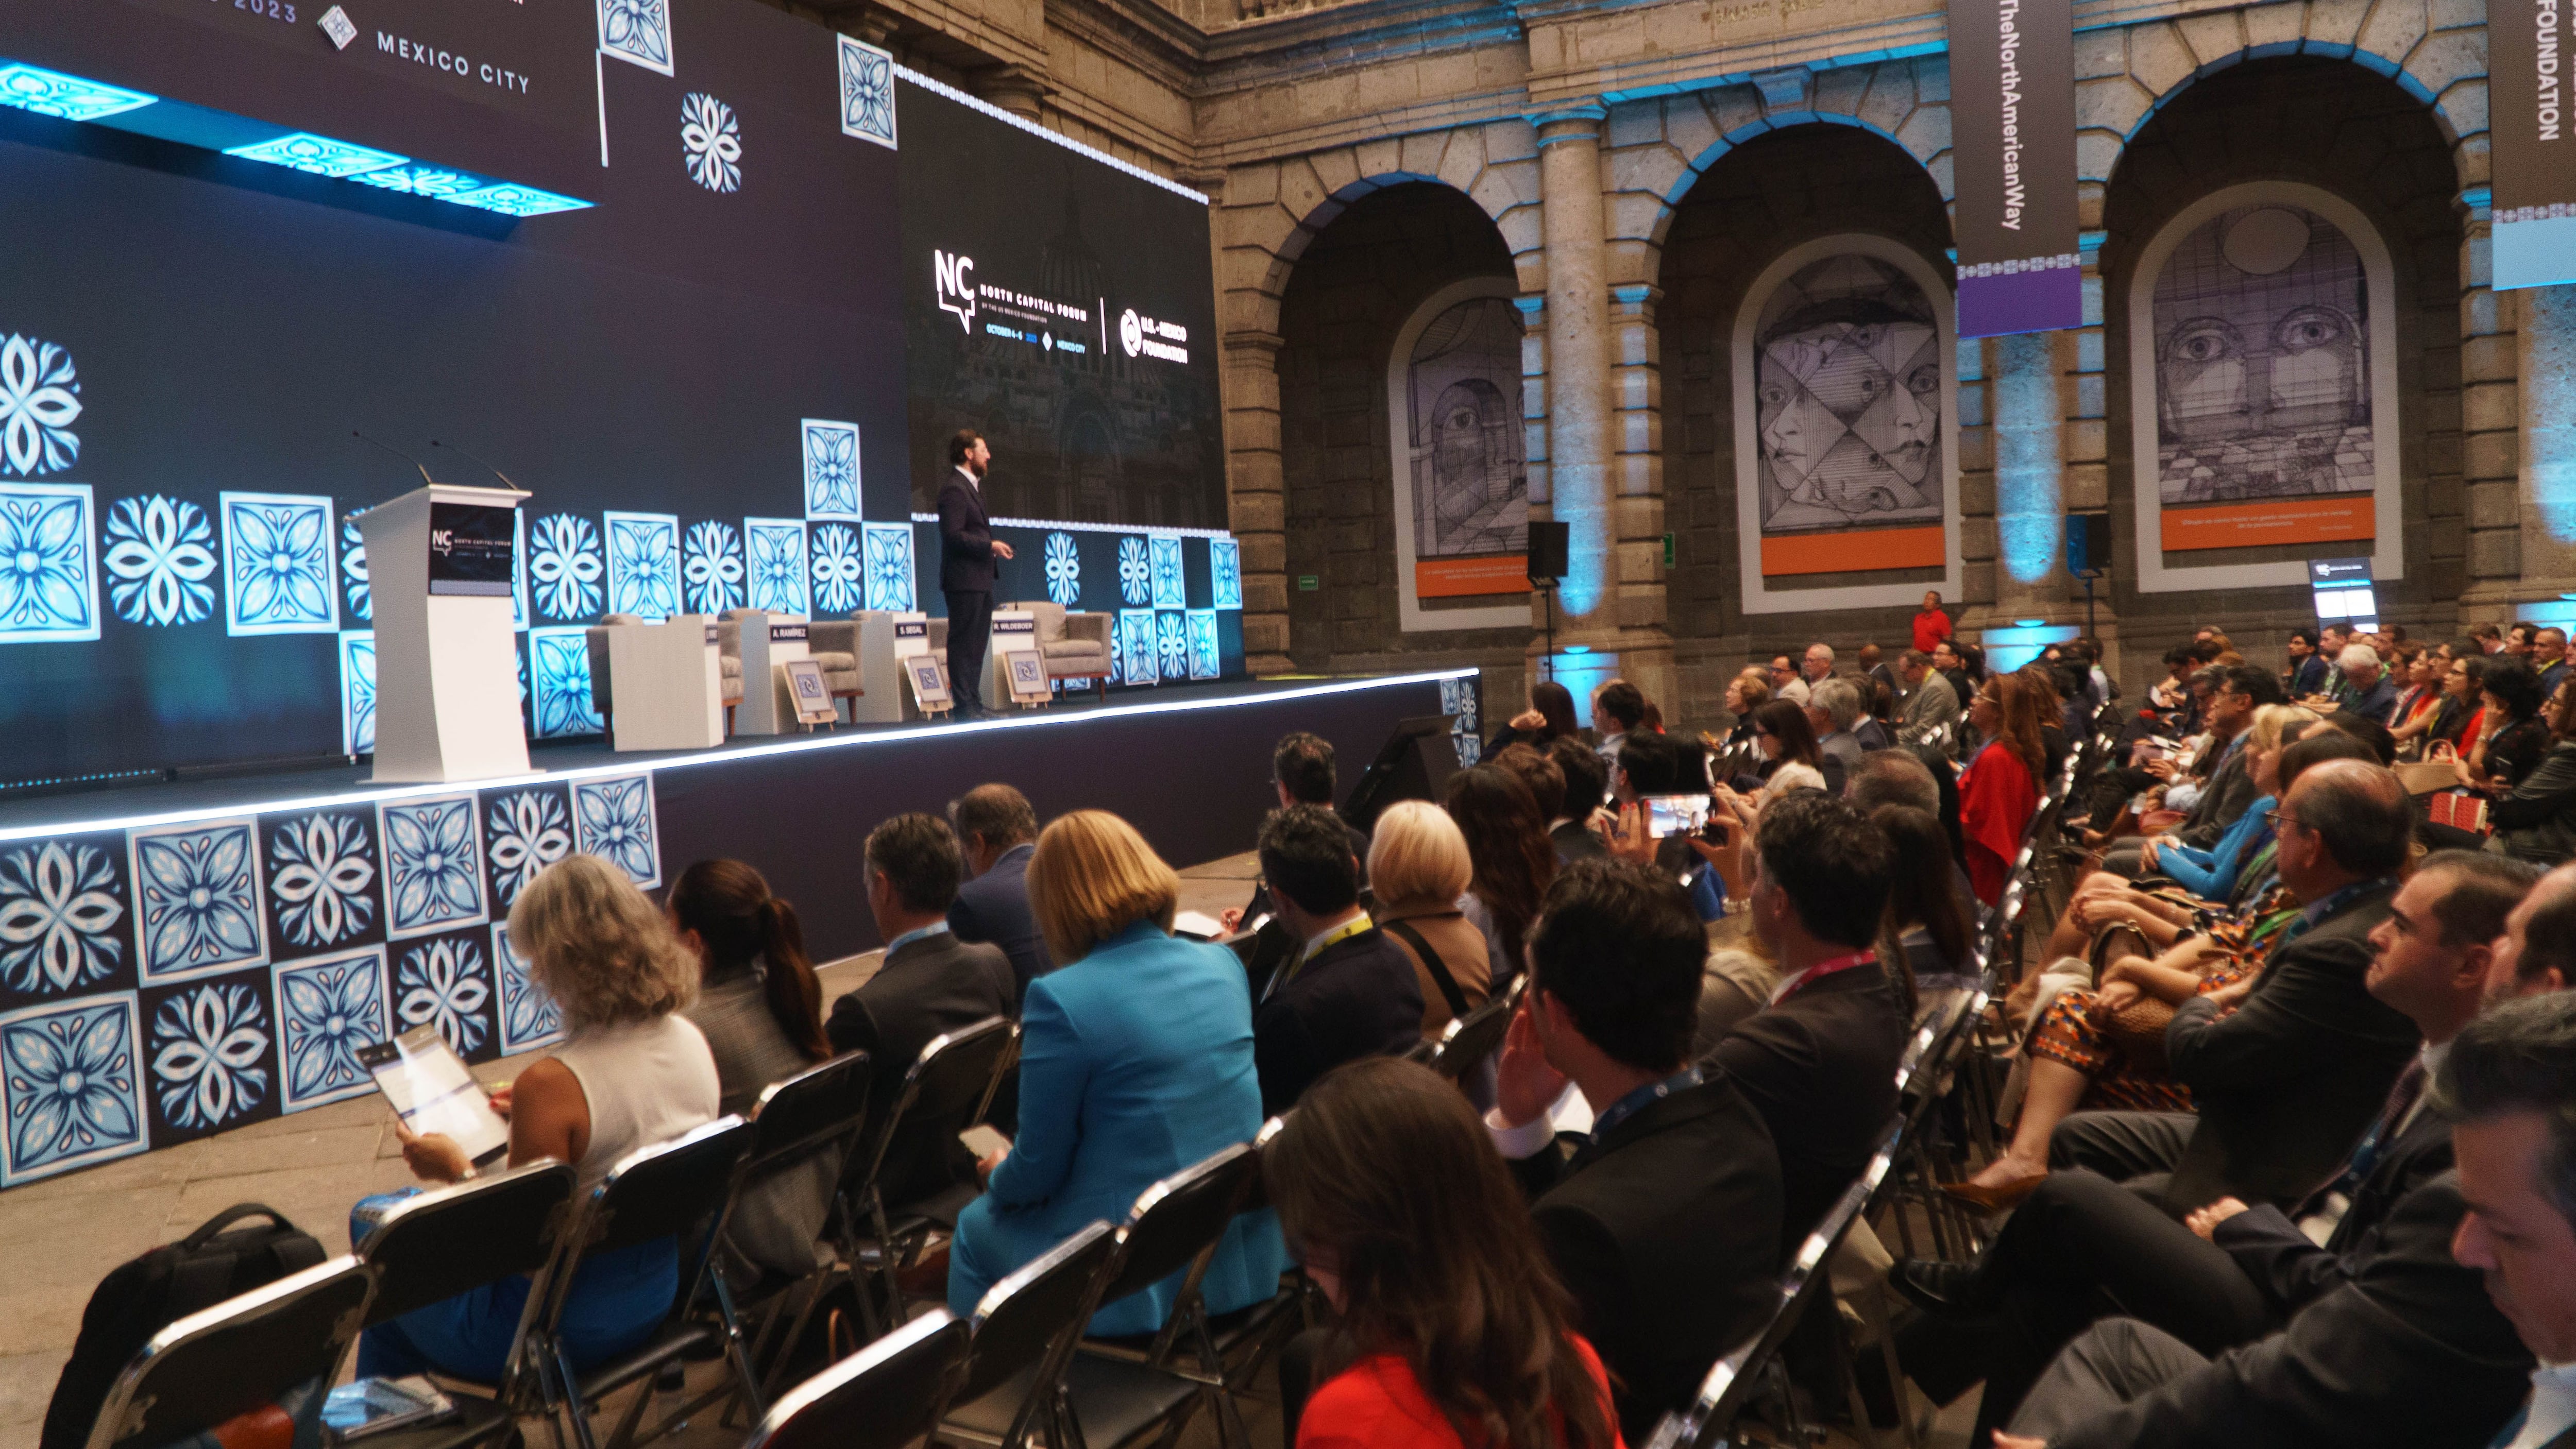 The Mining Palace will receive the activities of the North Capital Forum (Photo: Diego Alva/ Infobae México)